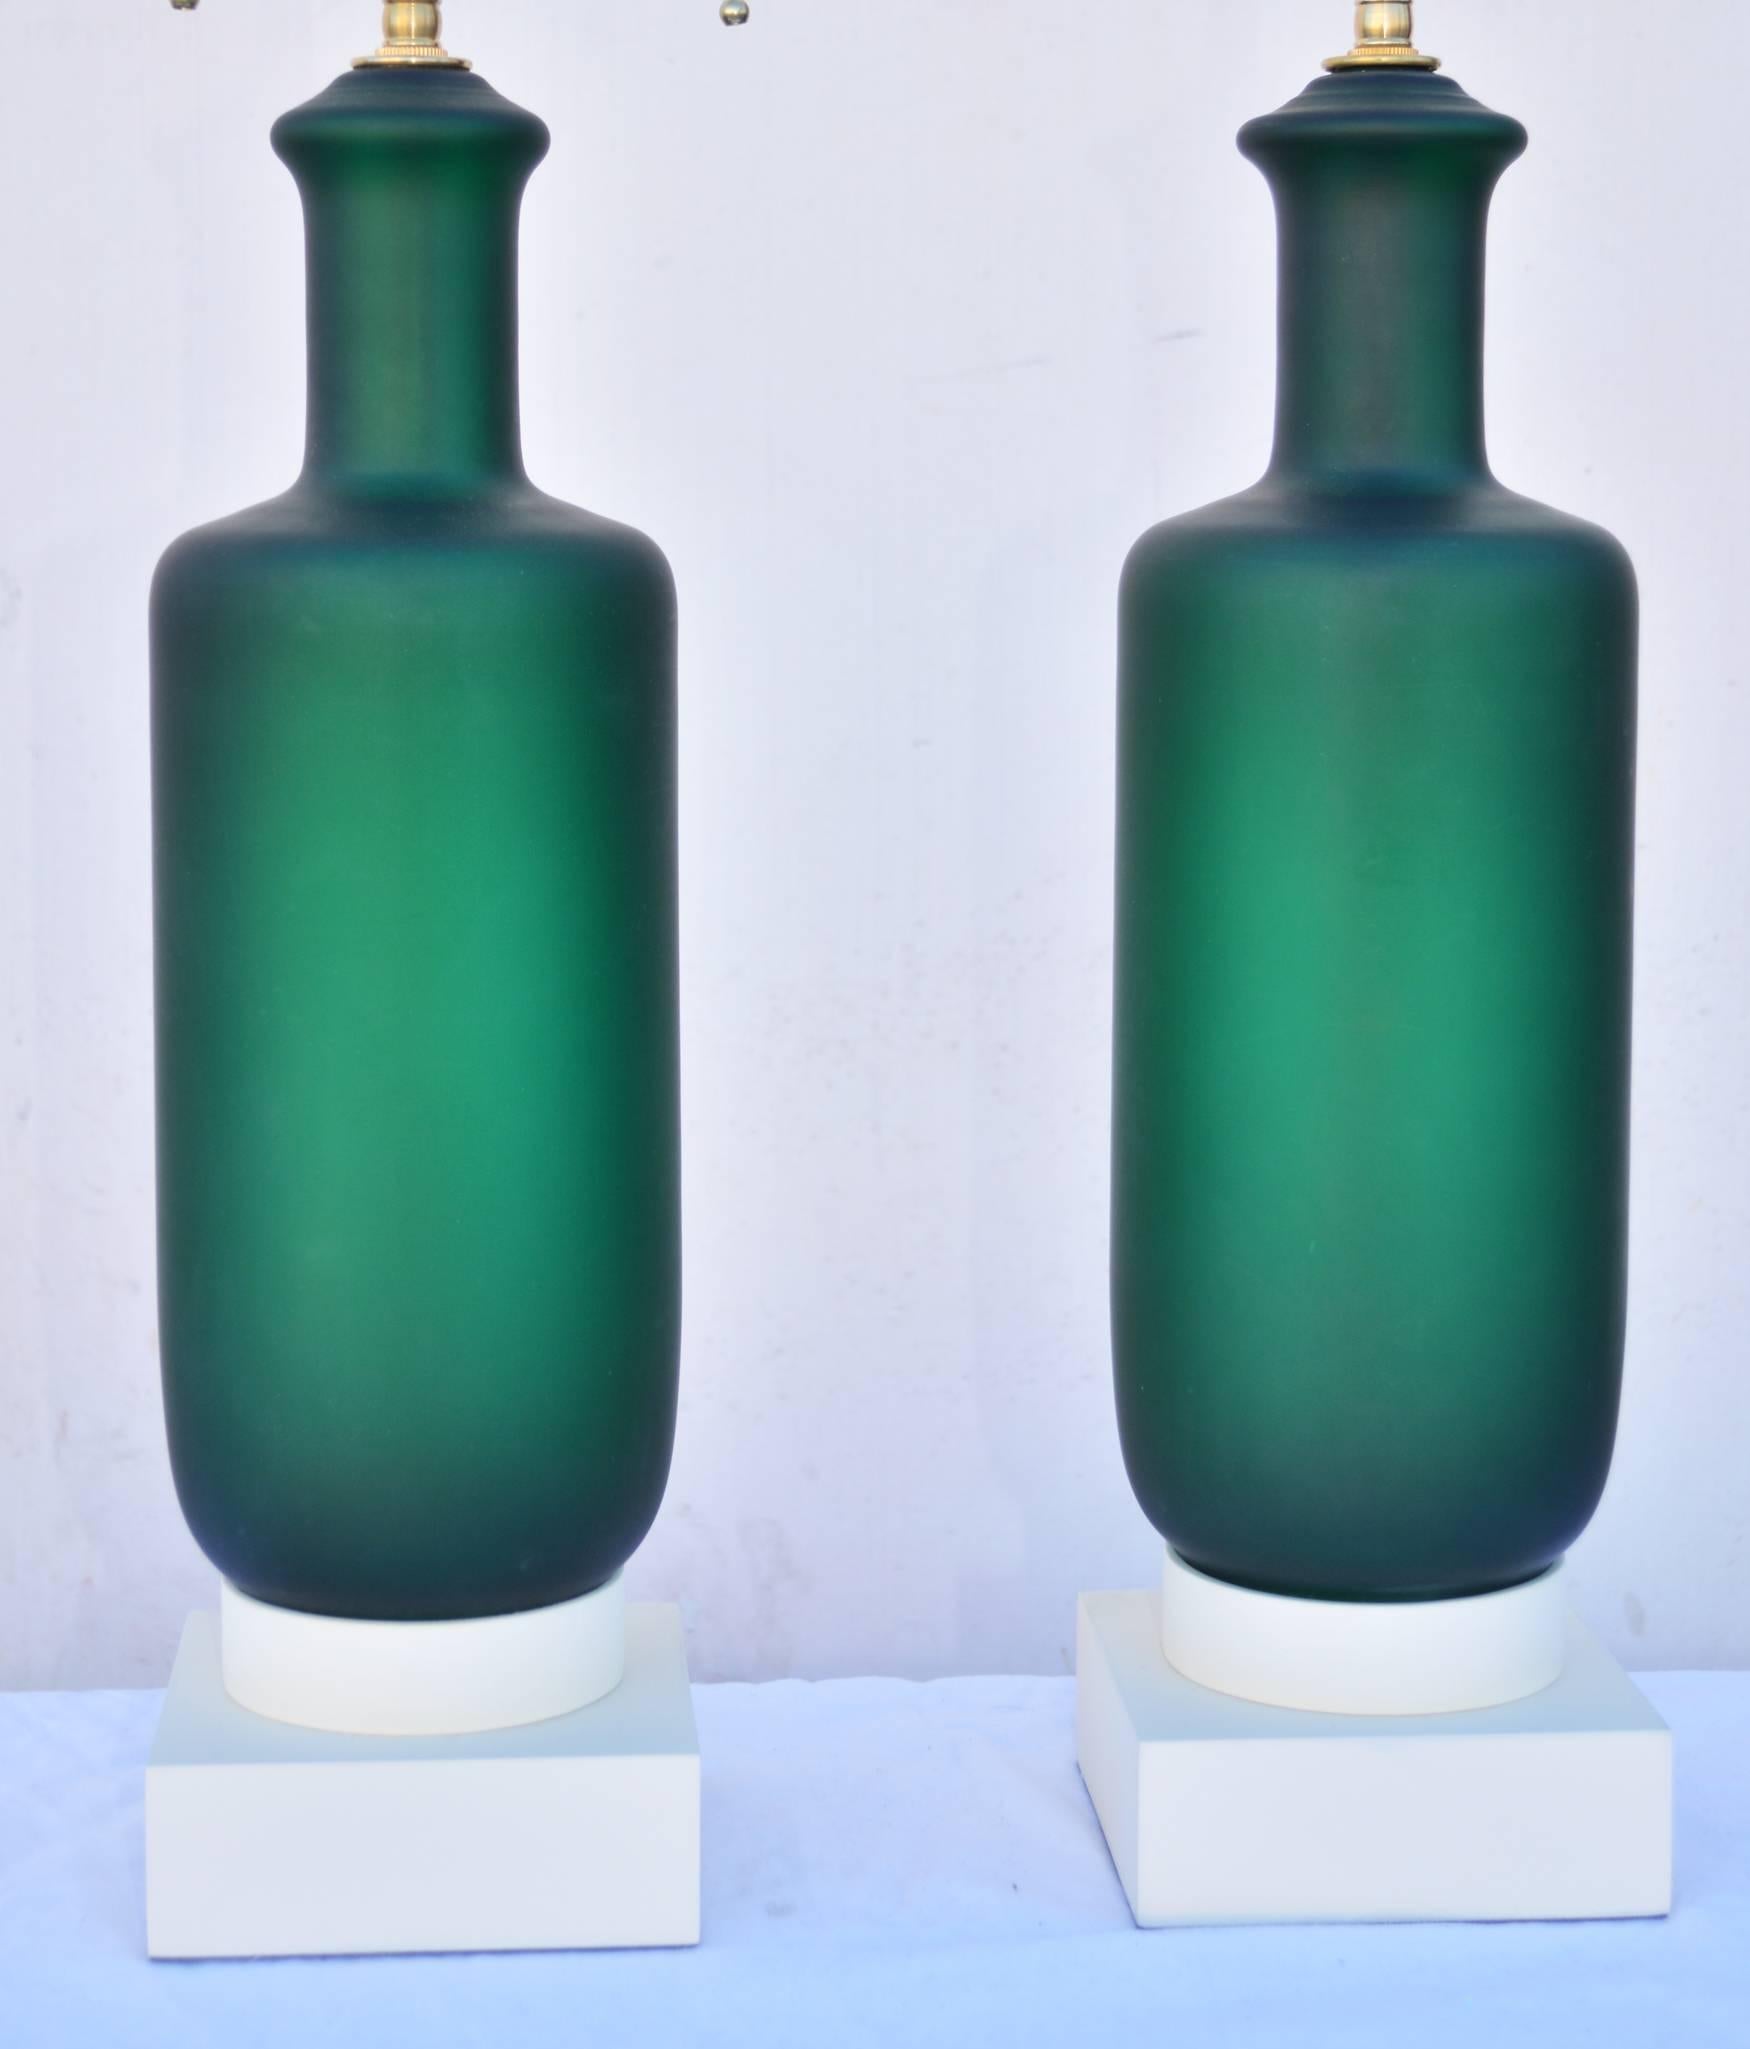 A lovely pair of Mid-Century lamps, with stunning green opaline veritable glass bodies on painted wood bases. Newly rewired with cloth French braid wire and brass double cluster sockets. Measures: 19.25" to top of glass. Base is 5.5"